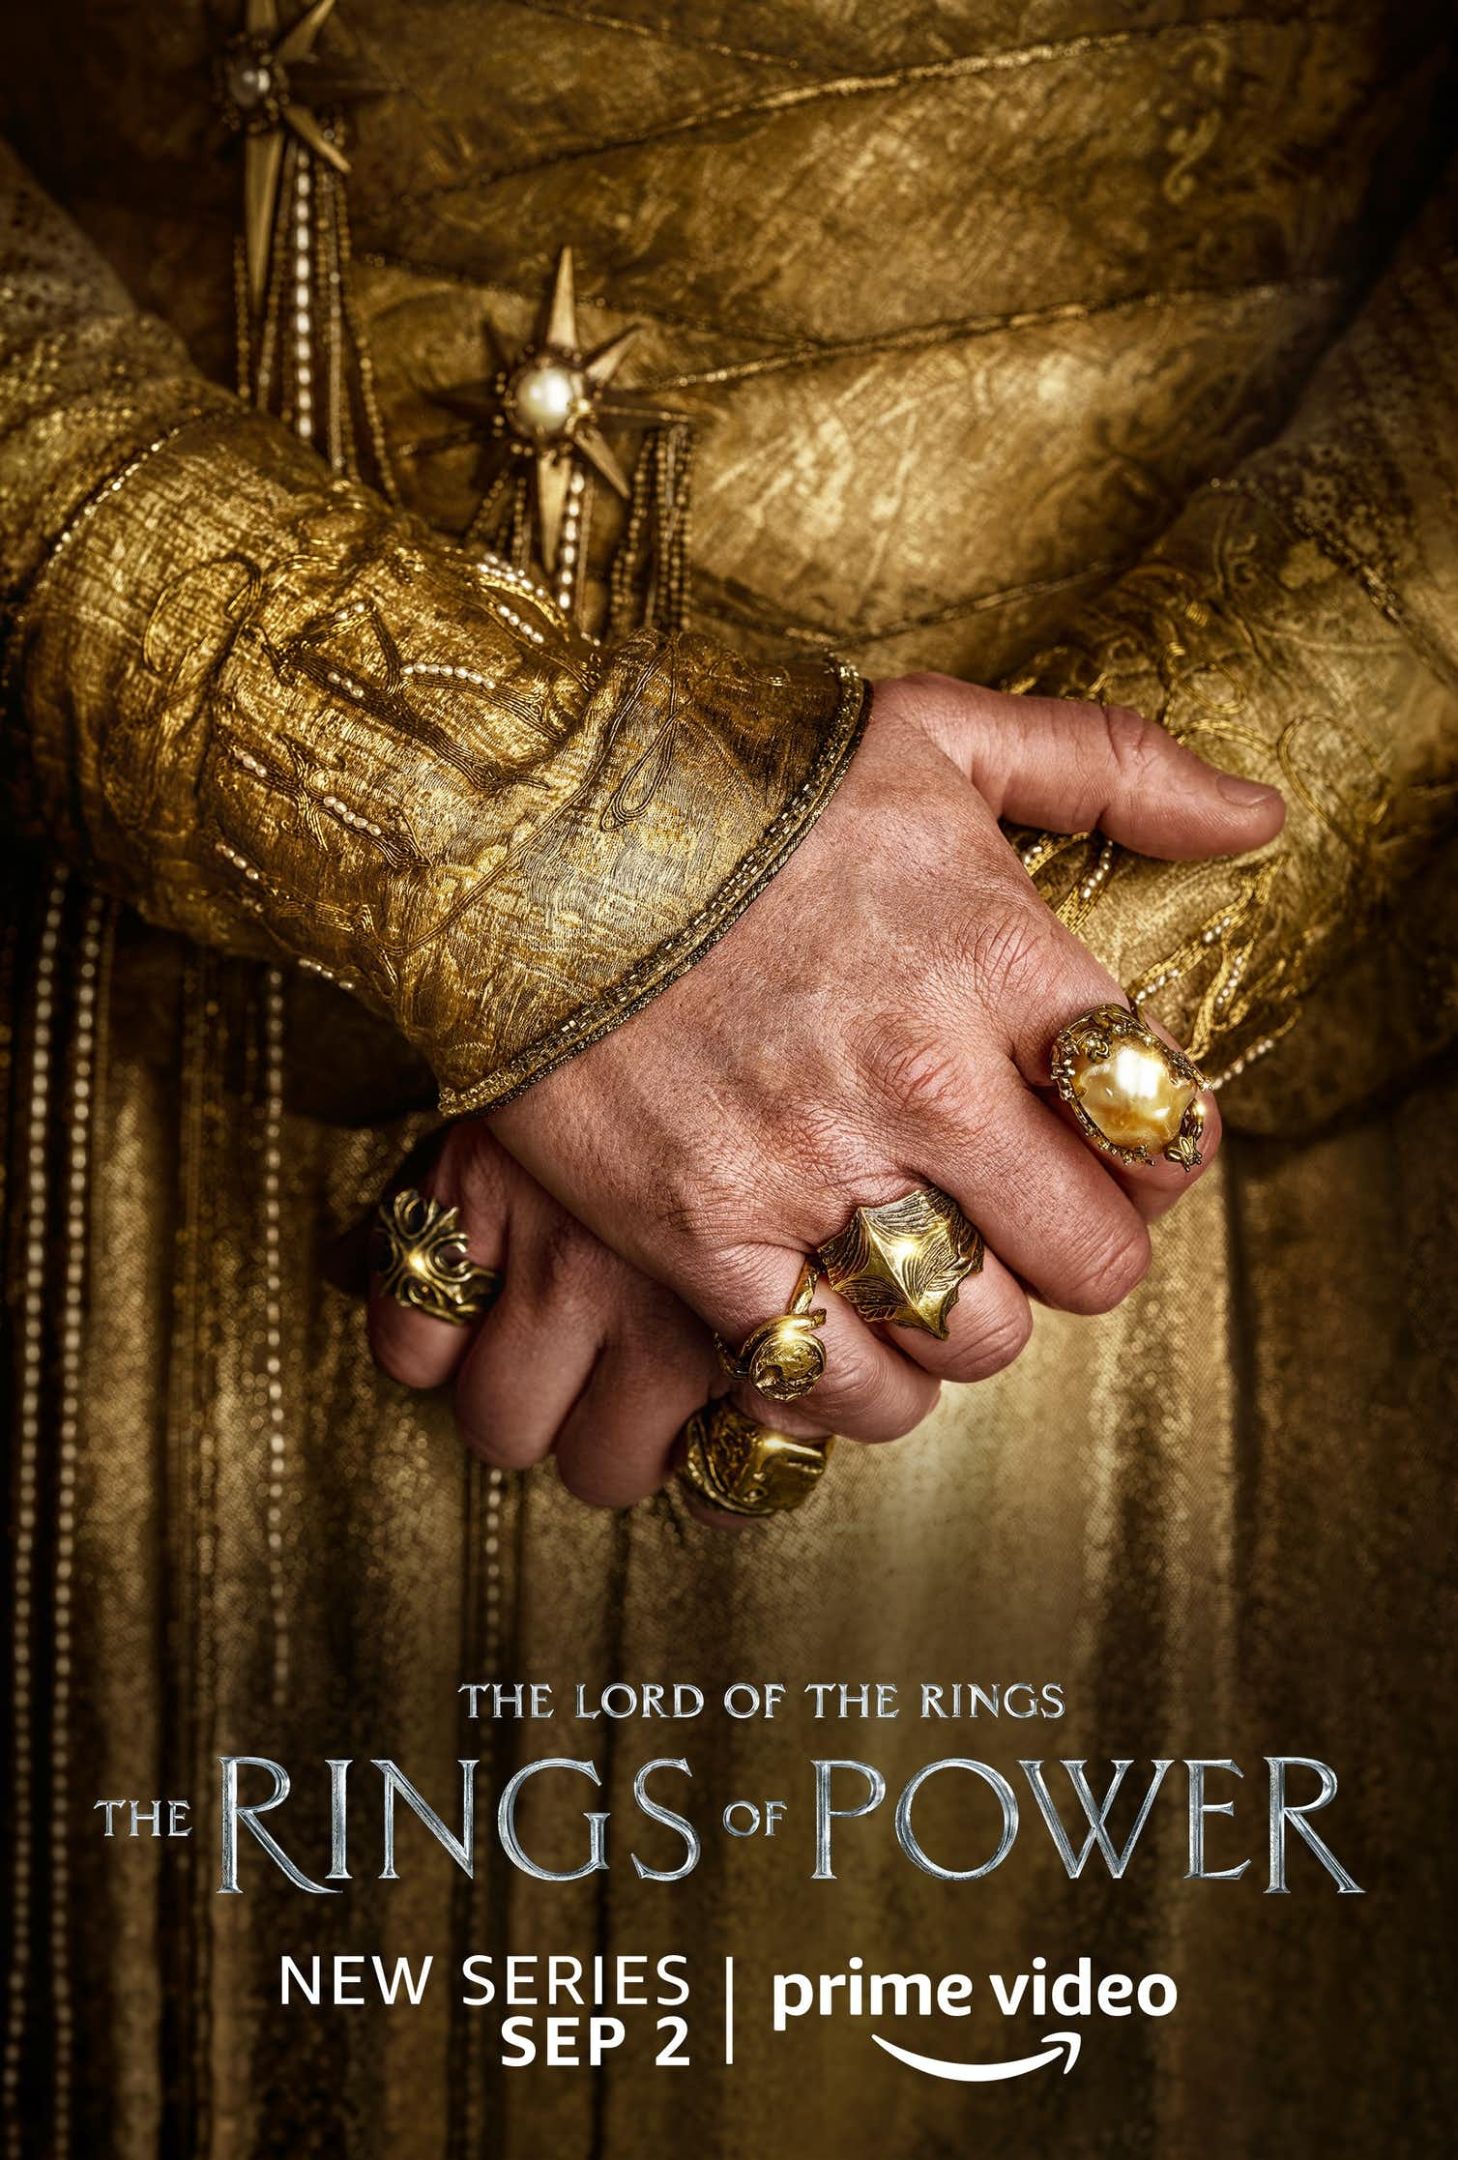 A poster of Amazon Studios upcoming The Rings of Power. someone dressed in gold is folding their hands over with lots of rings visible on their hands